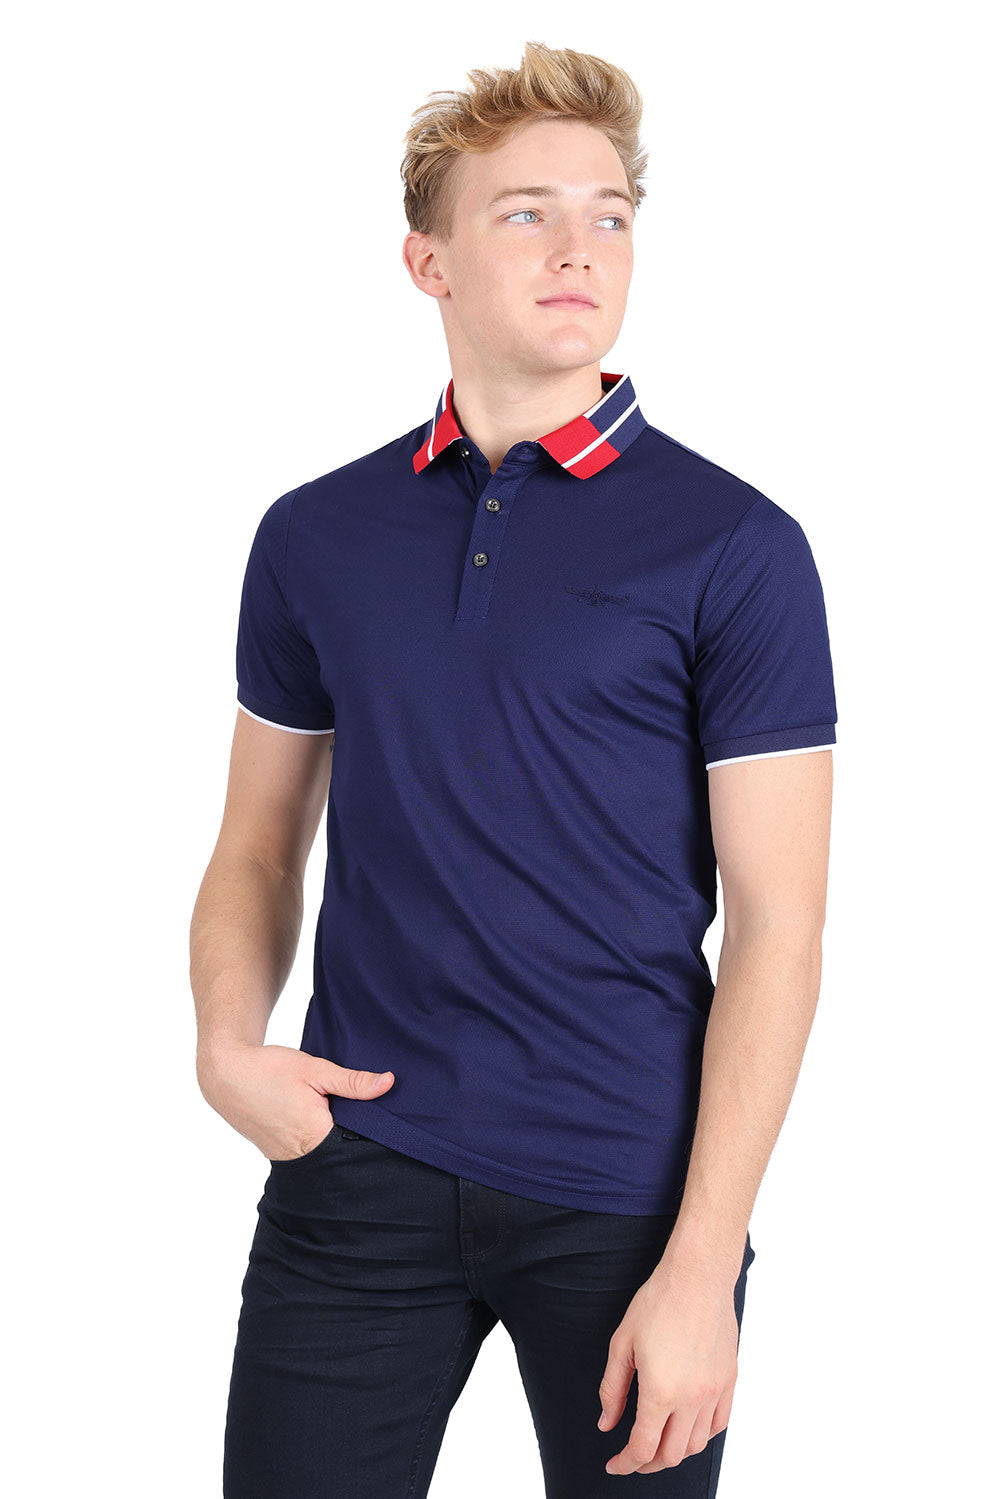 Barabas Men's Solid Color Luxury Short Sleeves Polo Shirts 2PP826 Navy